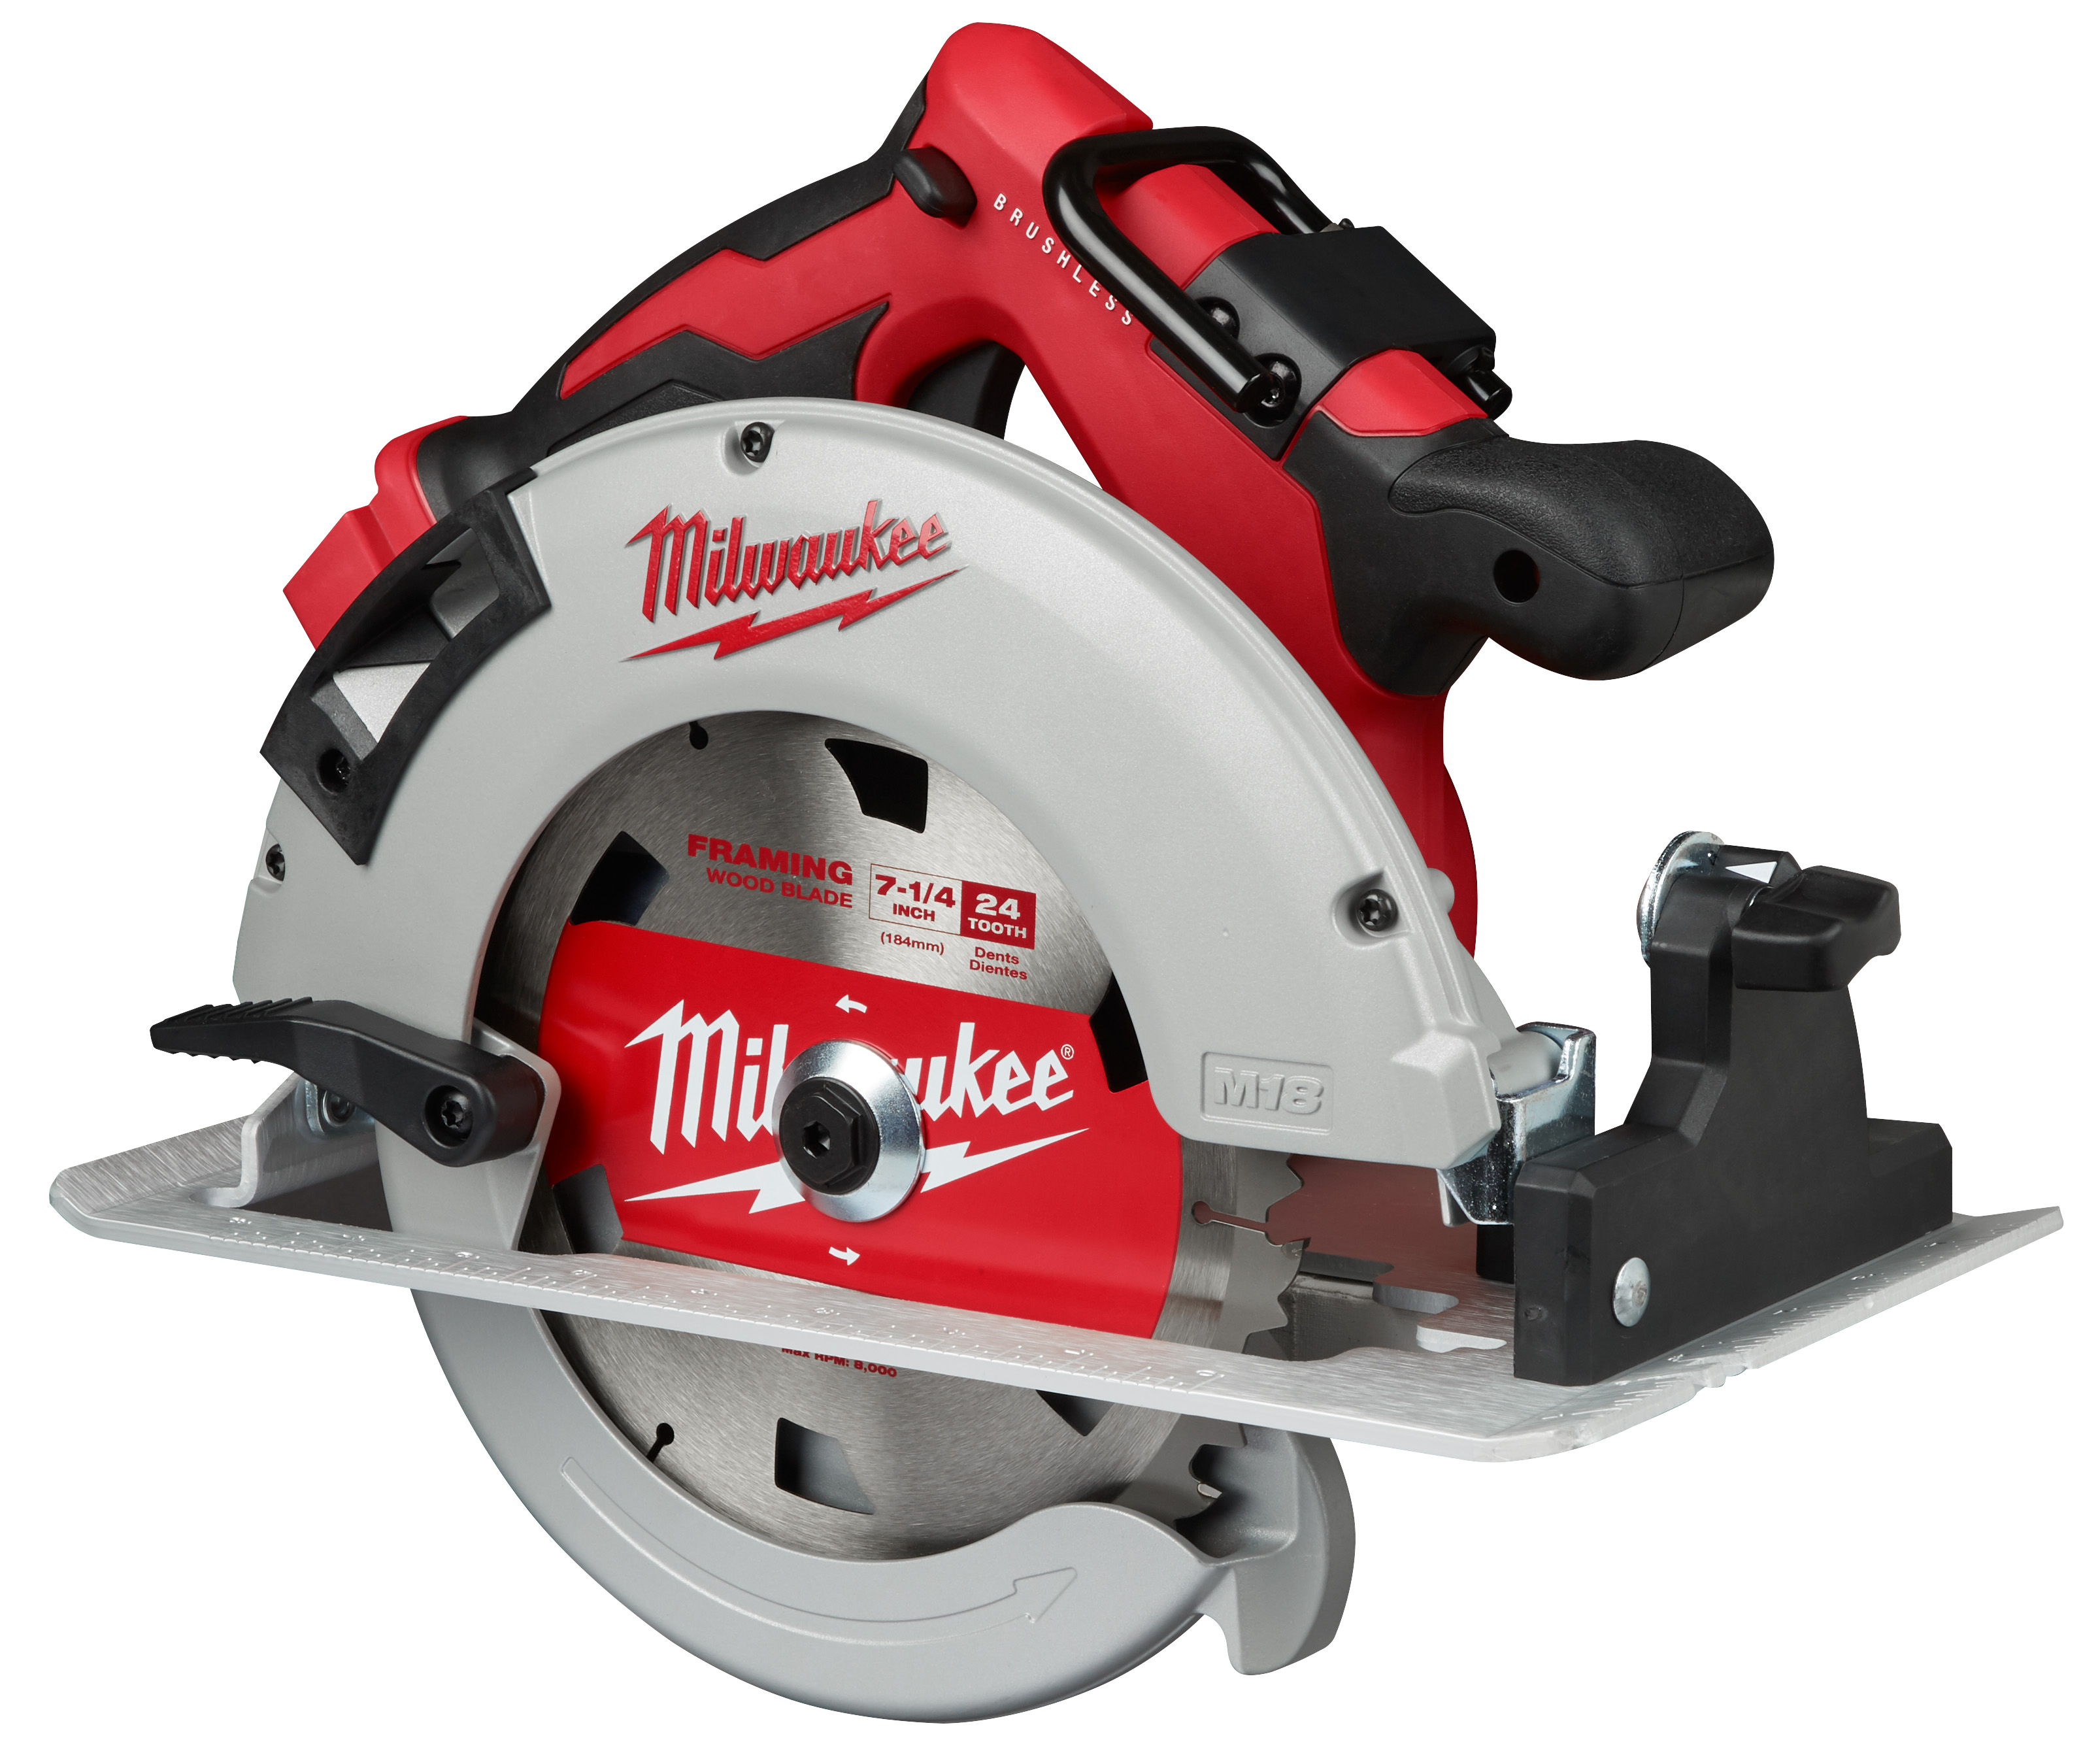 Milwaukee® 2630-20 Cordless Circular Saw, 6-1/2 in Blade, 5/8 in Arbor/Shank, 18 VDC, 1-5/8 in 45 deg, 2-1/8 in at 90 deg D Cutting, Lithium-Ion Battery, Left Blade Side